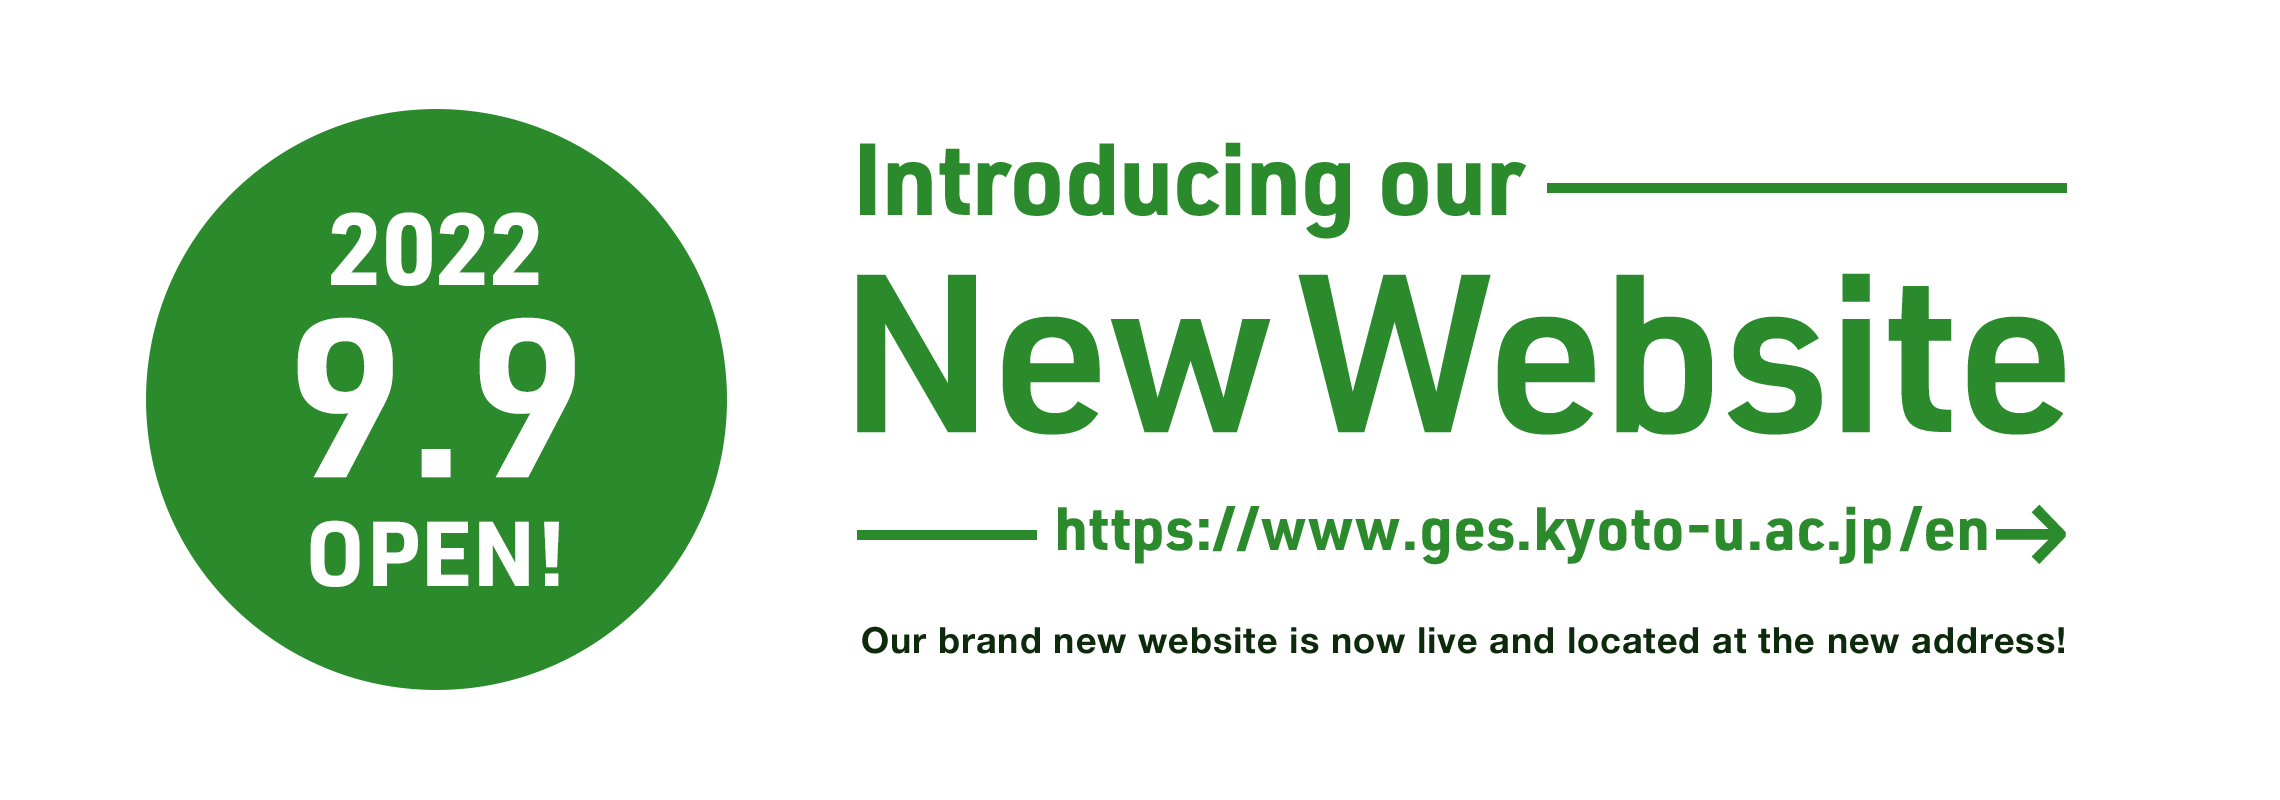 Our brand new website is now live and located at the new address!